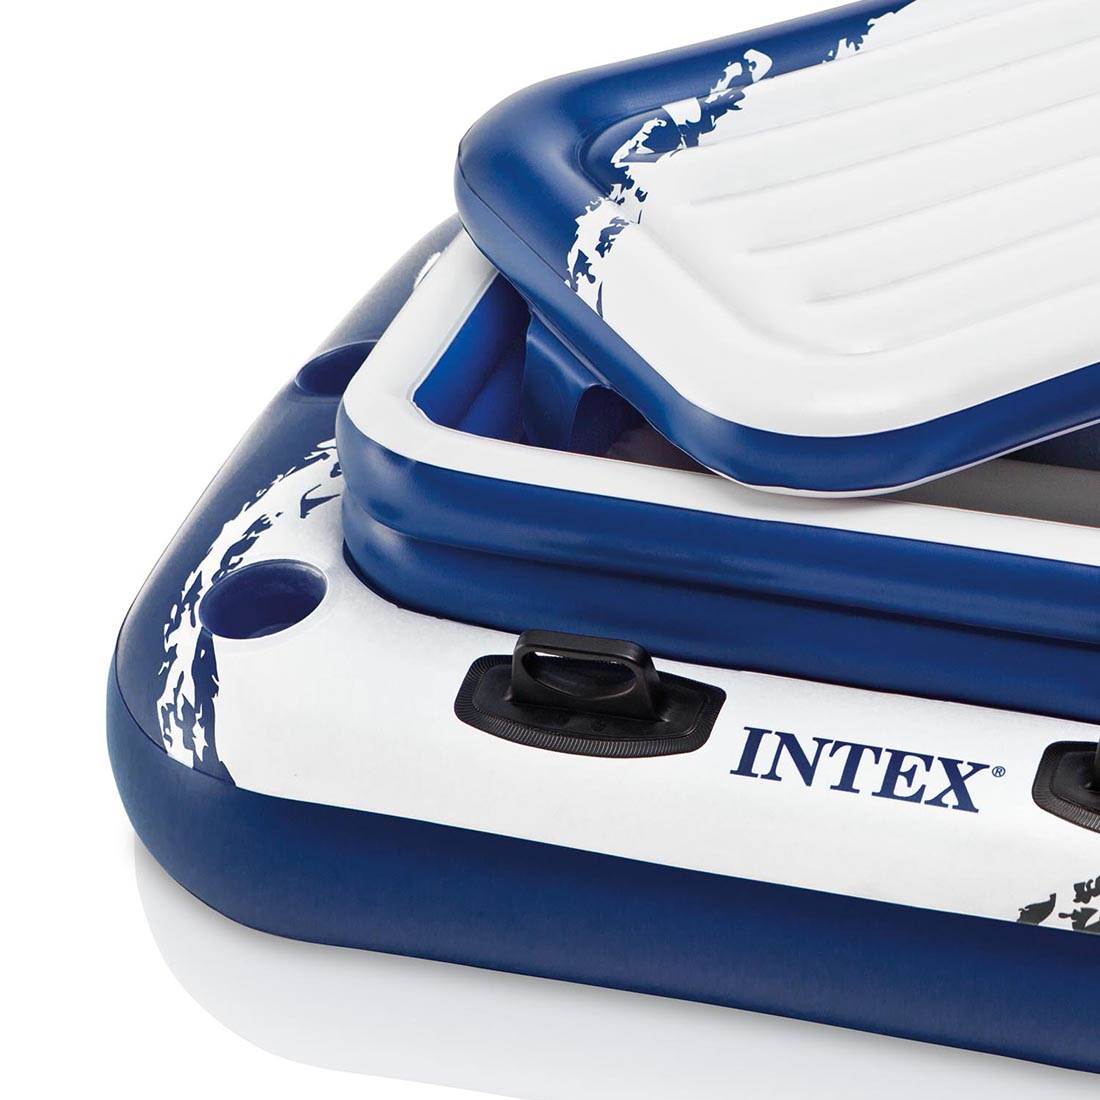 Intex Mega Chill 2 Inflatable Float For Water Use - image 3 of 5